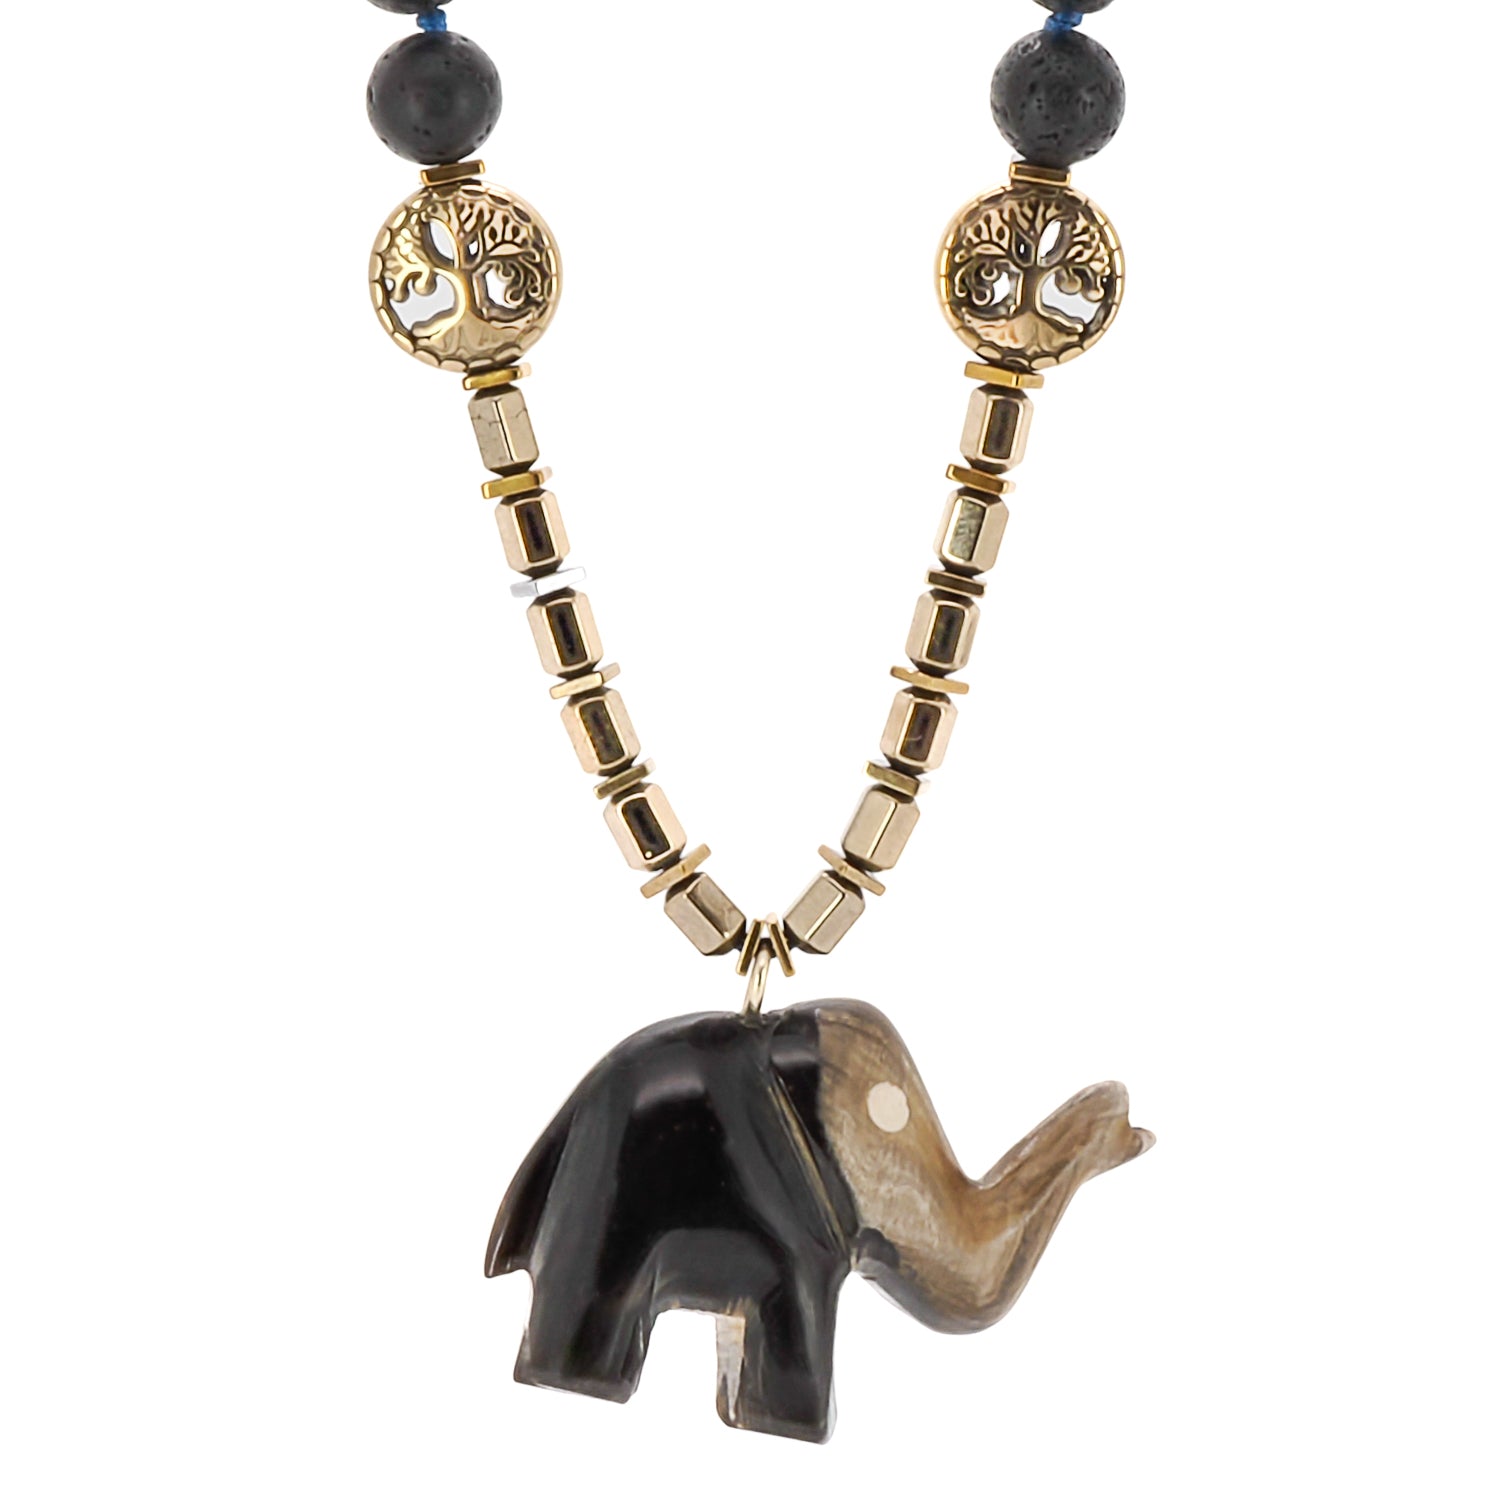 The Spiritual Nepal Elephant Necklace, a truly captivating accessory